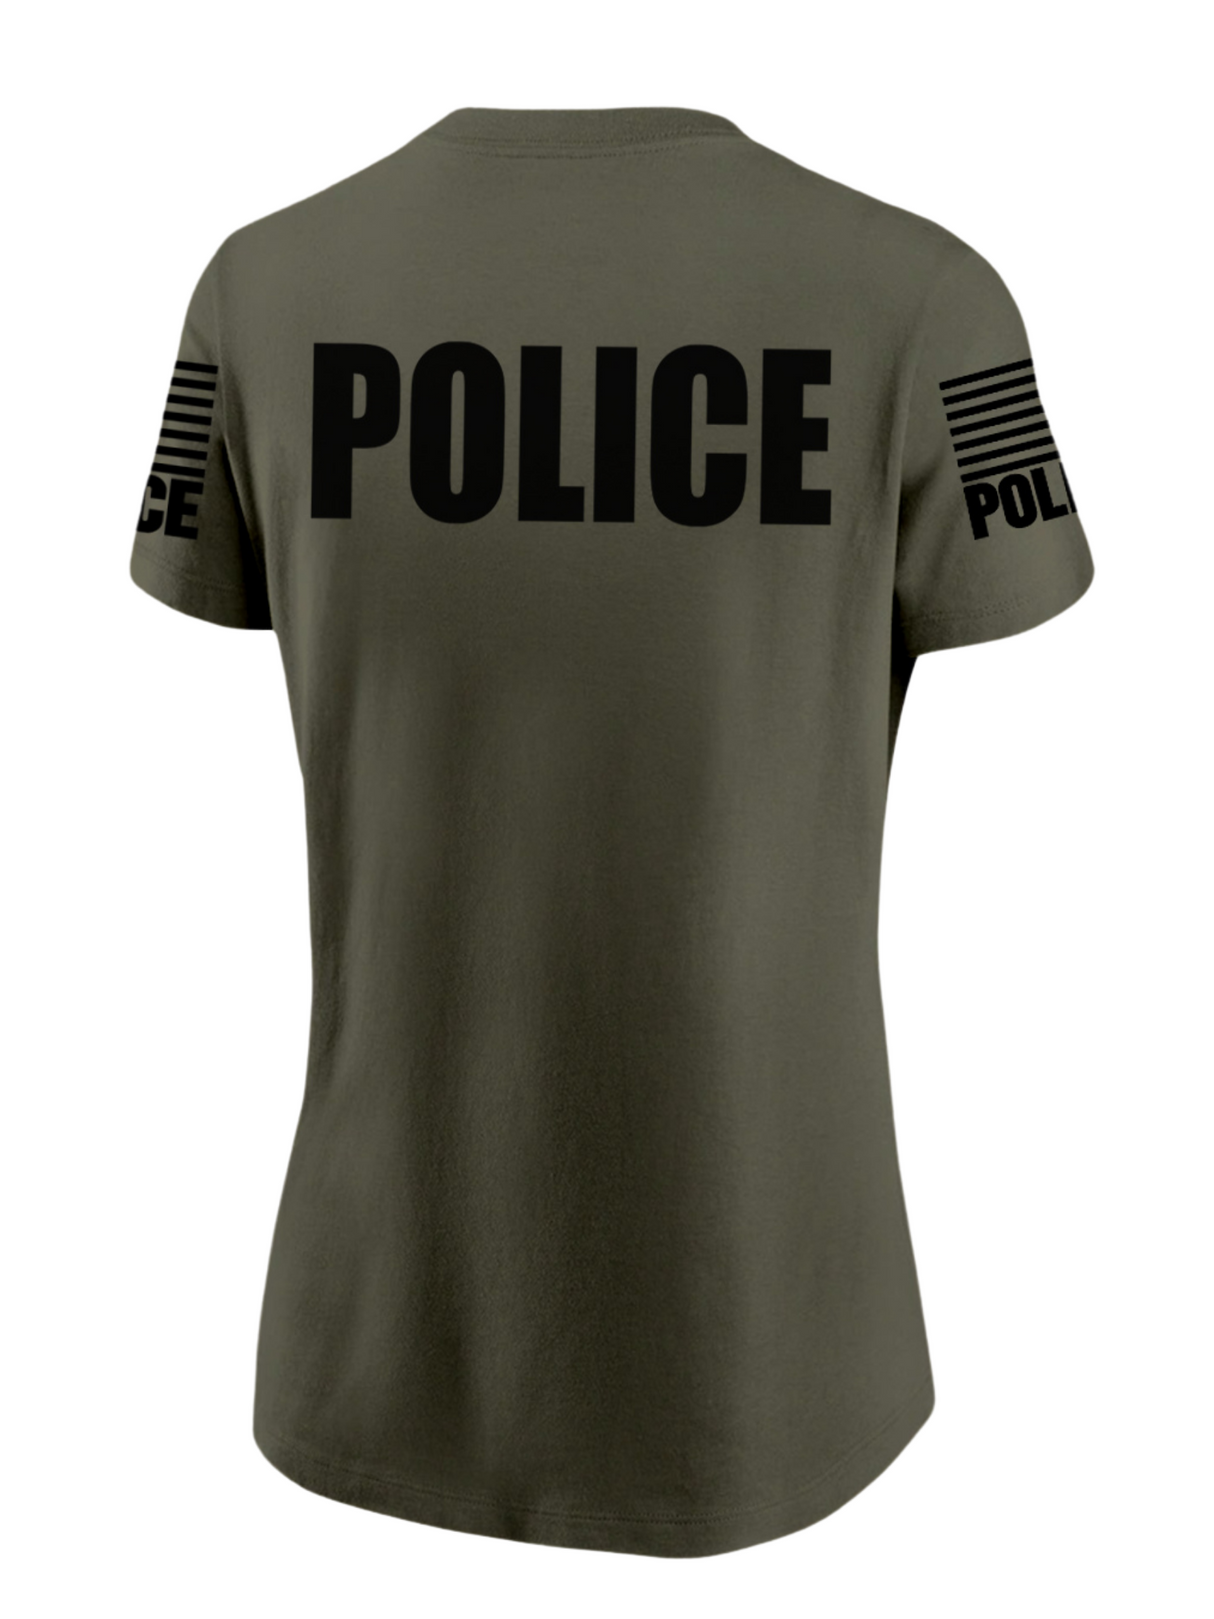 Womens law enforcement olive drab green police shirt